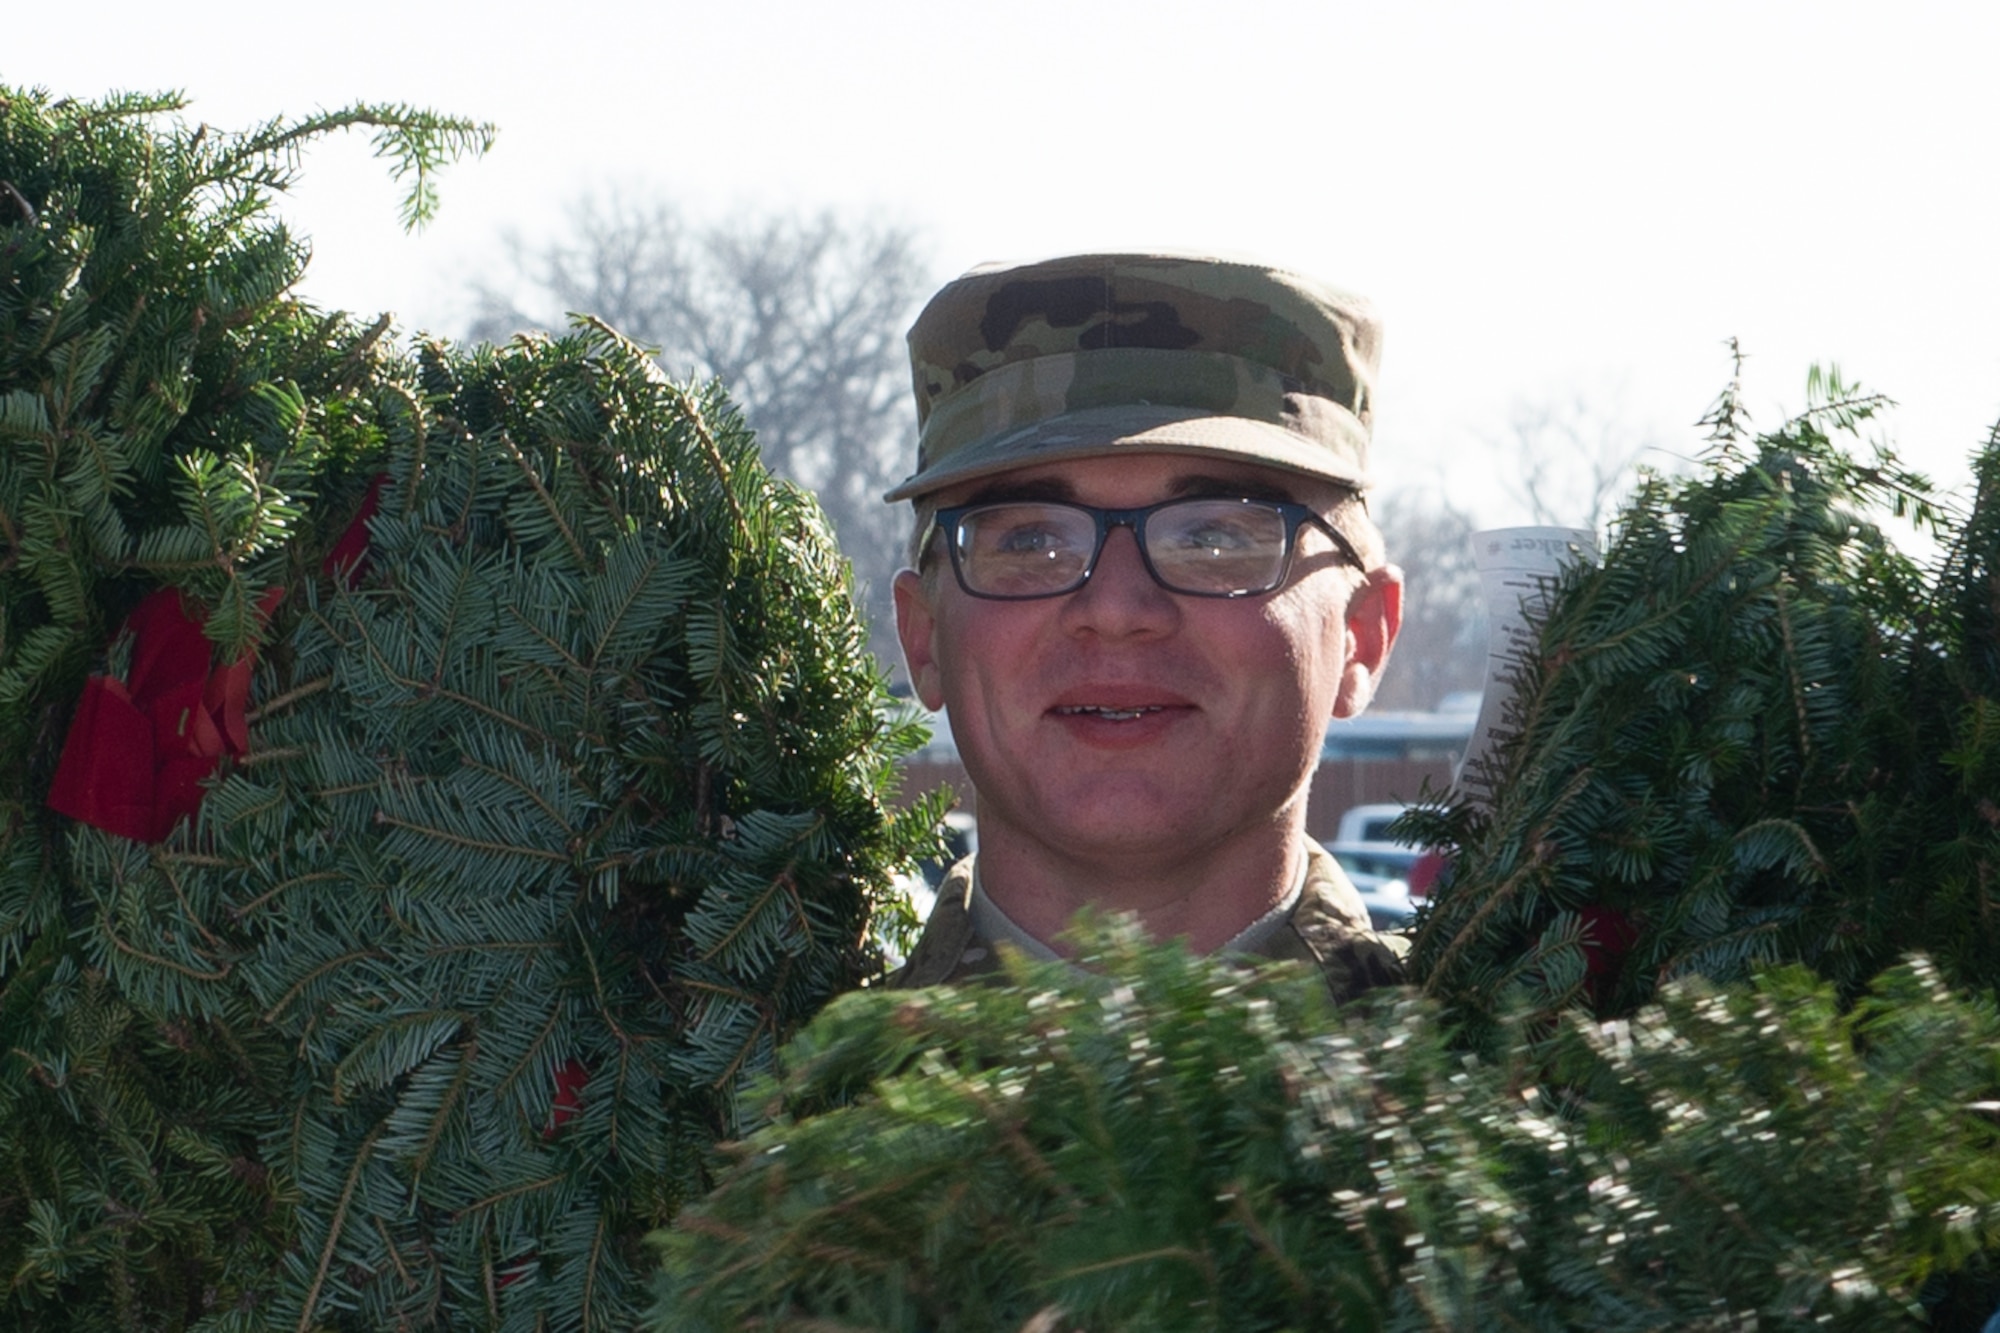 A Team Offutt volunteer smiles as he carries wreaths to the base cemetery, at Offutt Air Force Base, Neb., Dec. 11, 2019. Volunteers helped unload 86 boxes of wreaths that were delivered by a semi truck in preparation for a Wreaths Across America ceremony.